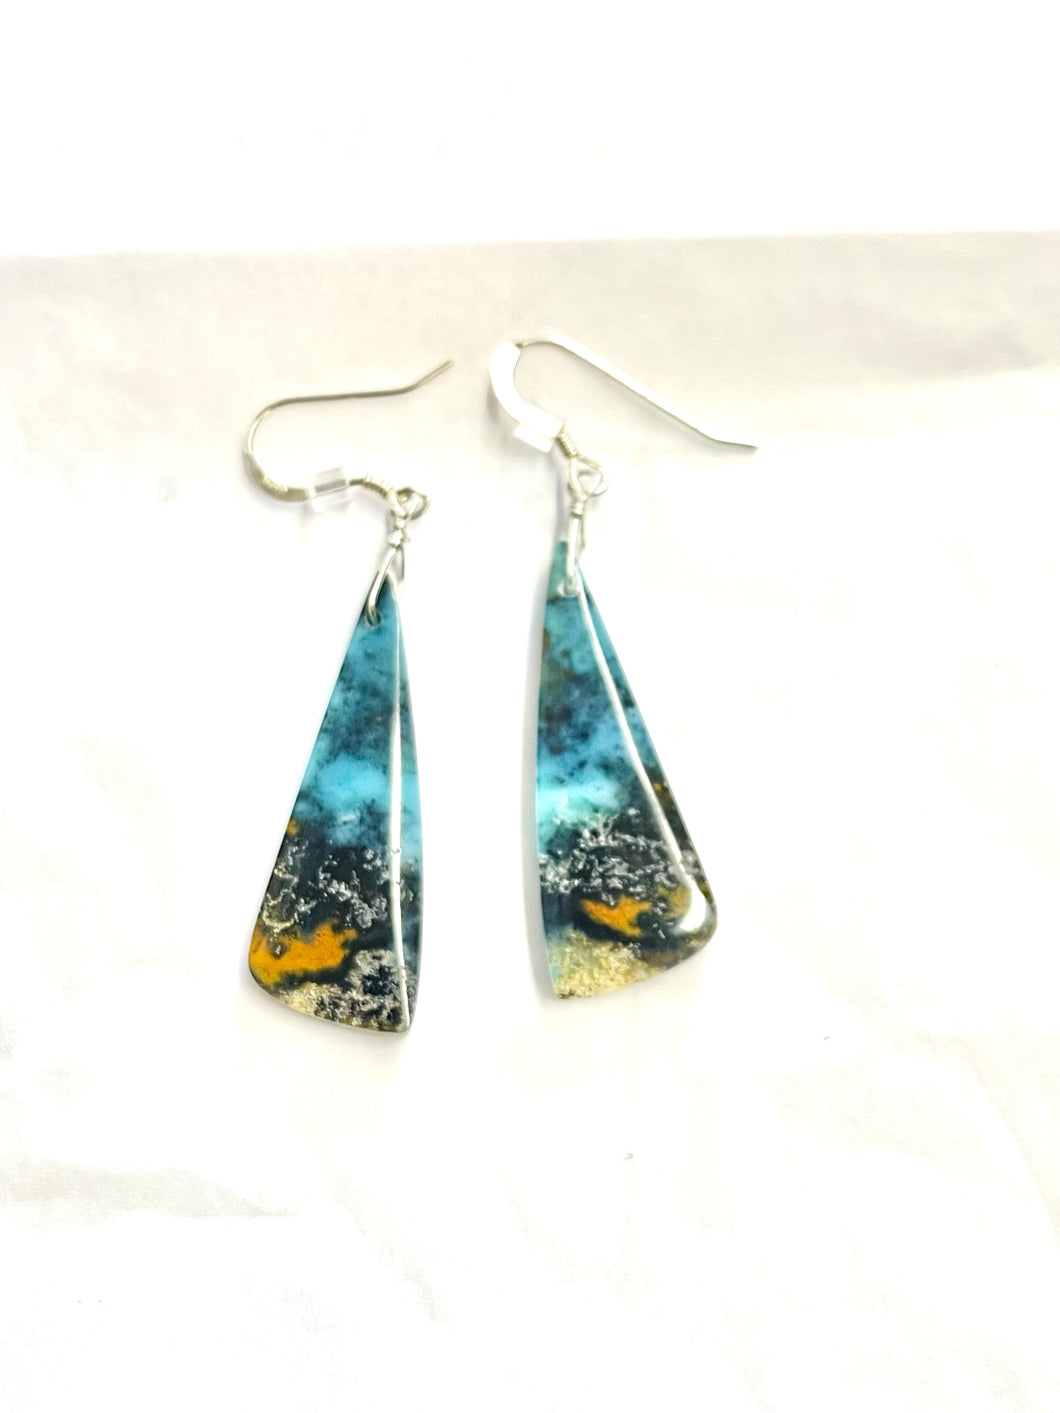 Earrings with multi-color opalized wood